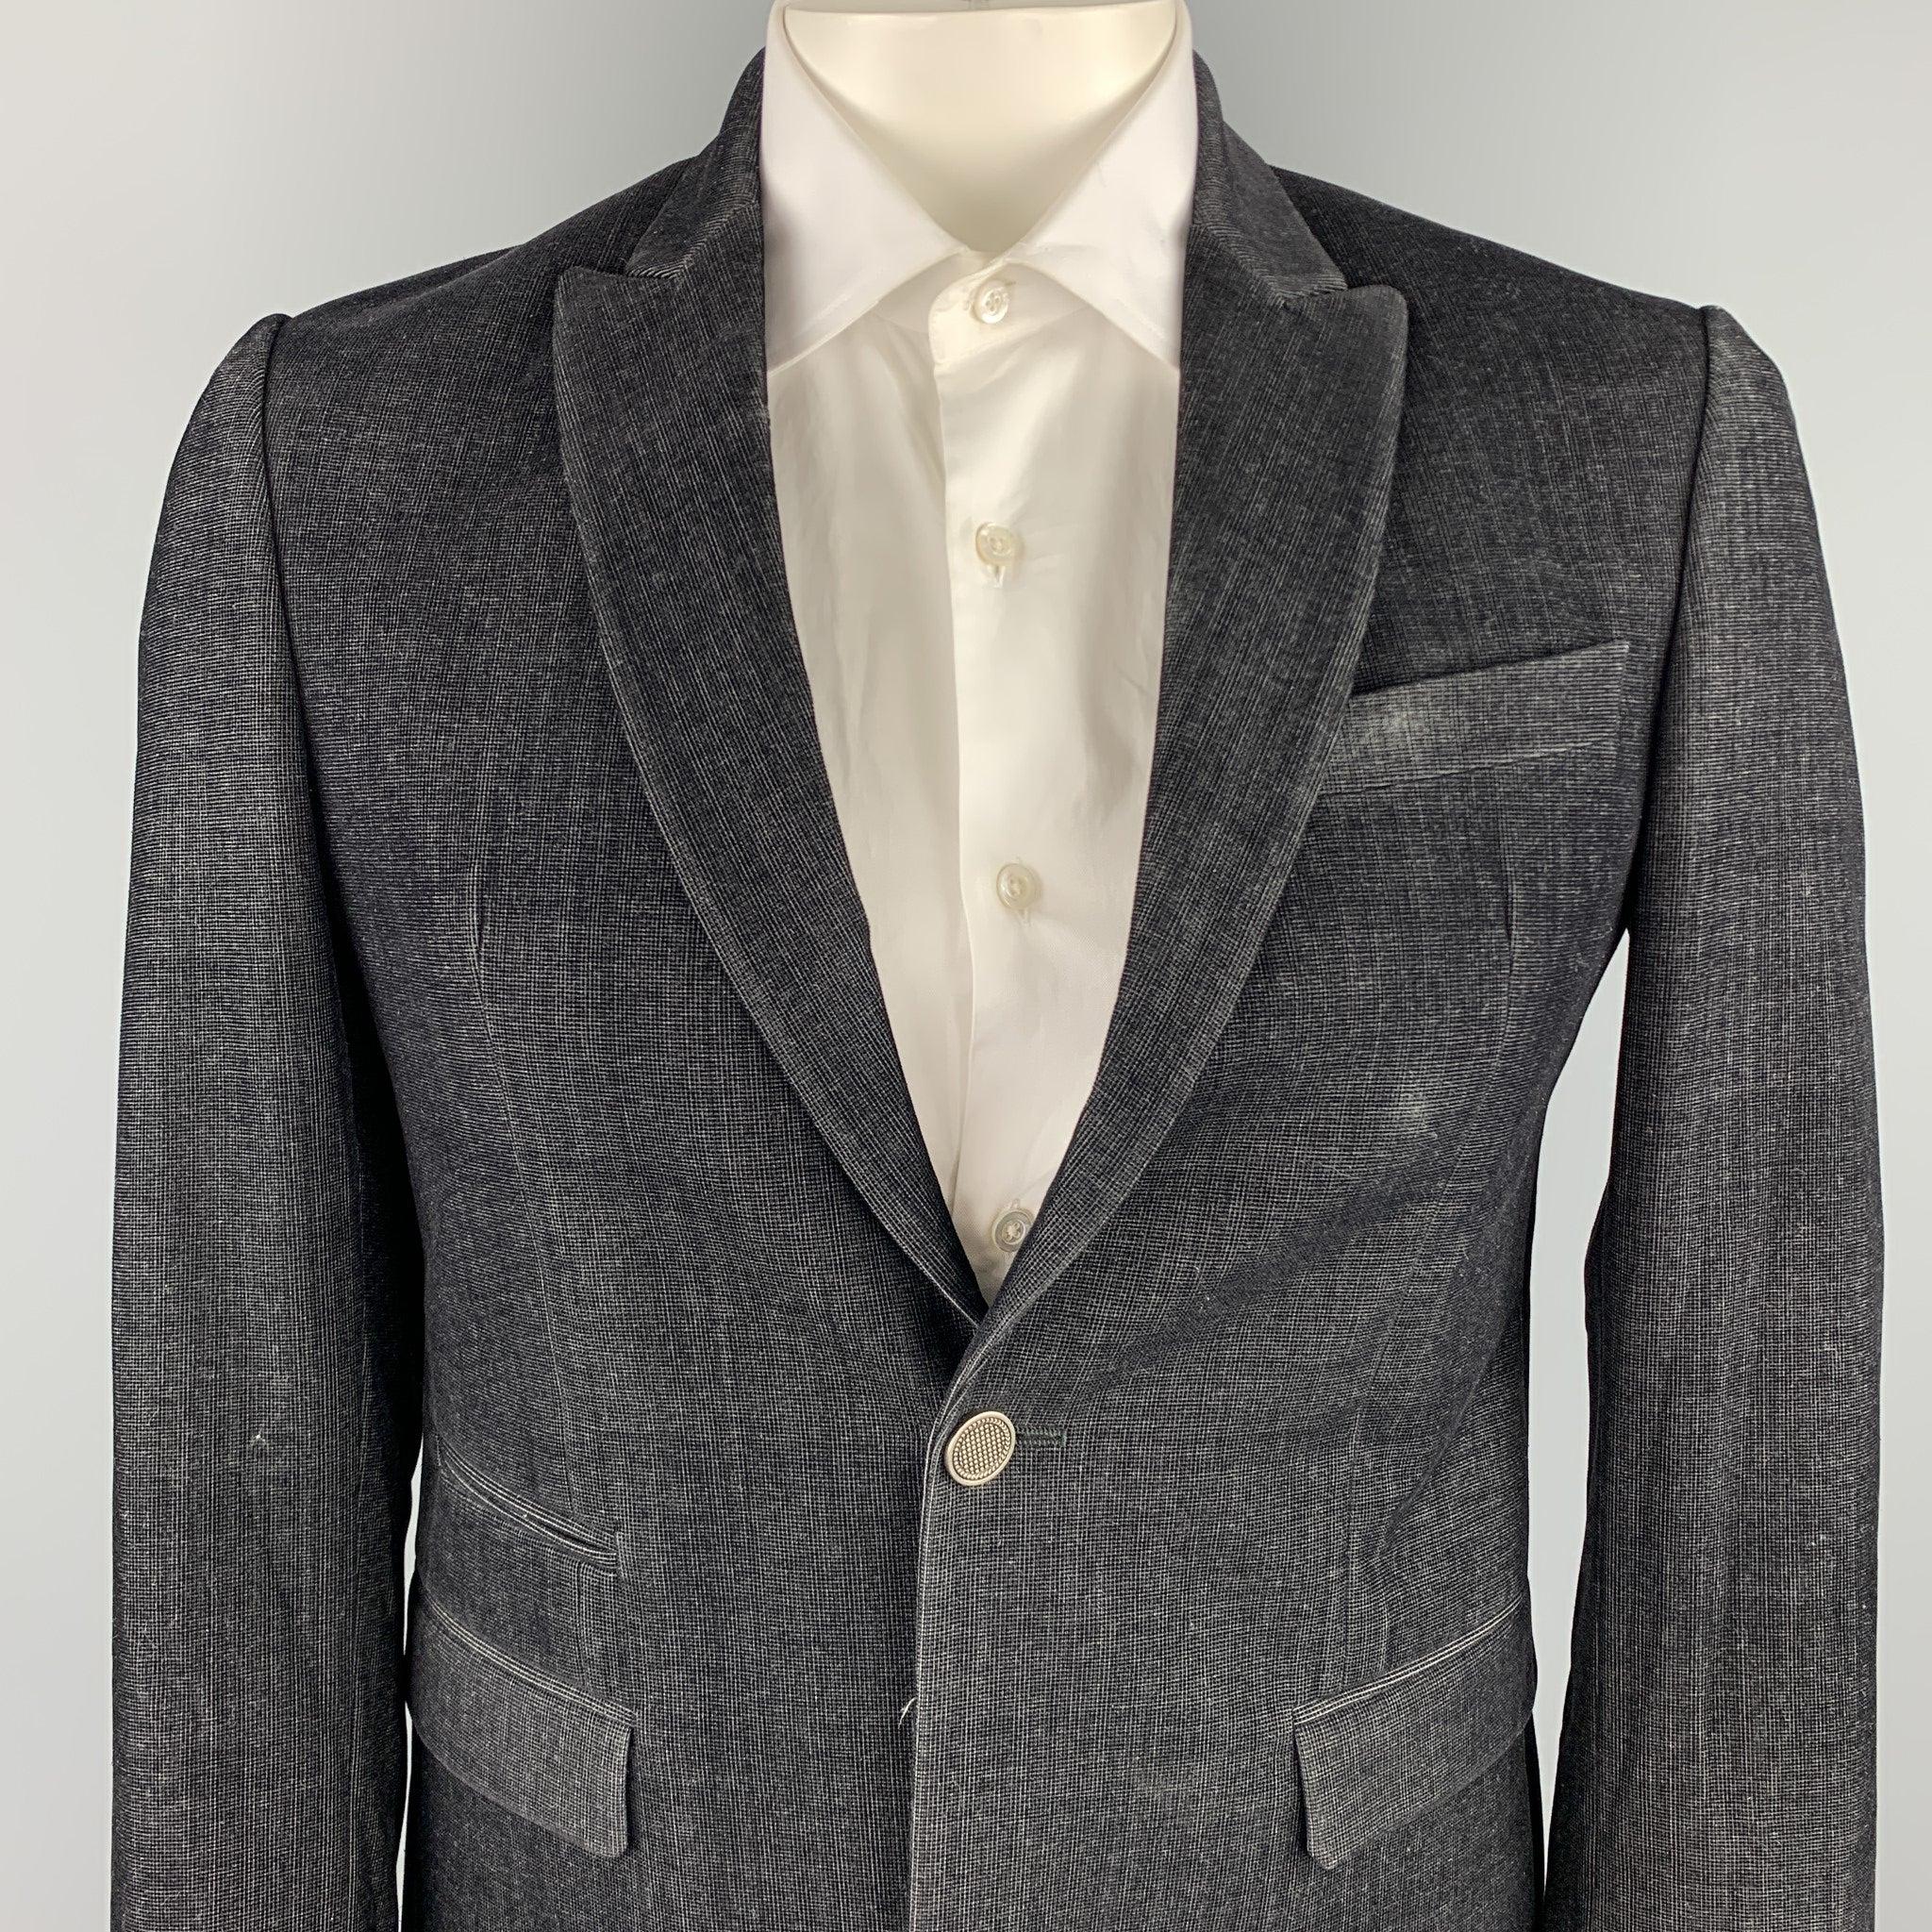 JUST CAVALLI sport coat comes in a black textured polyester blend with a full monogram liner featuring a peak lapel, flap pockets, and a single button closure. Made in Italy.Excellent
Pre-Owned Condition. 

Marked:   IT 50 

Measurements: 
